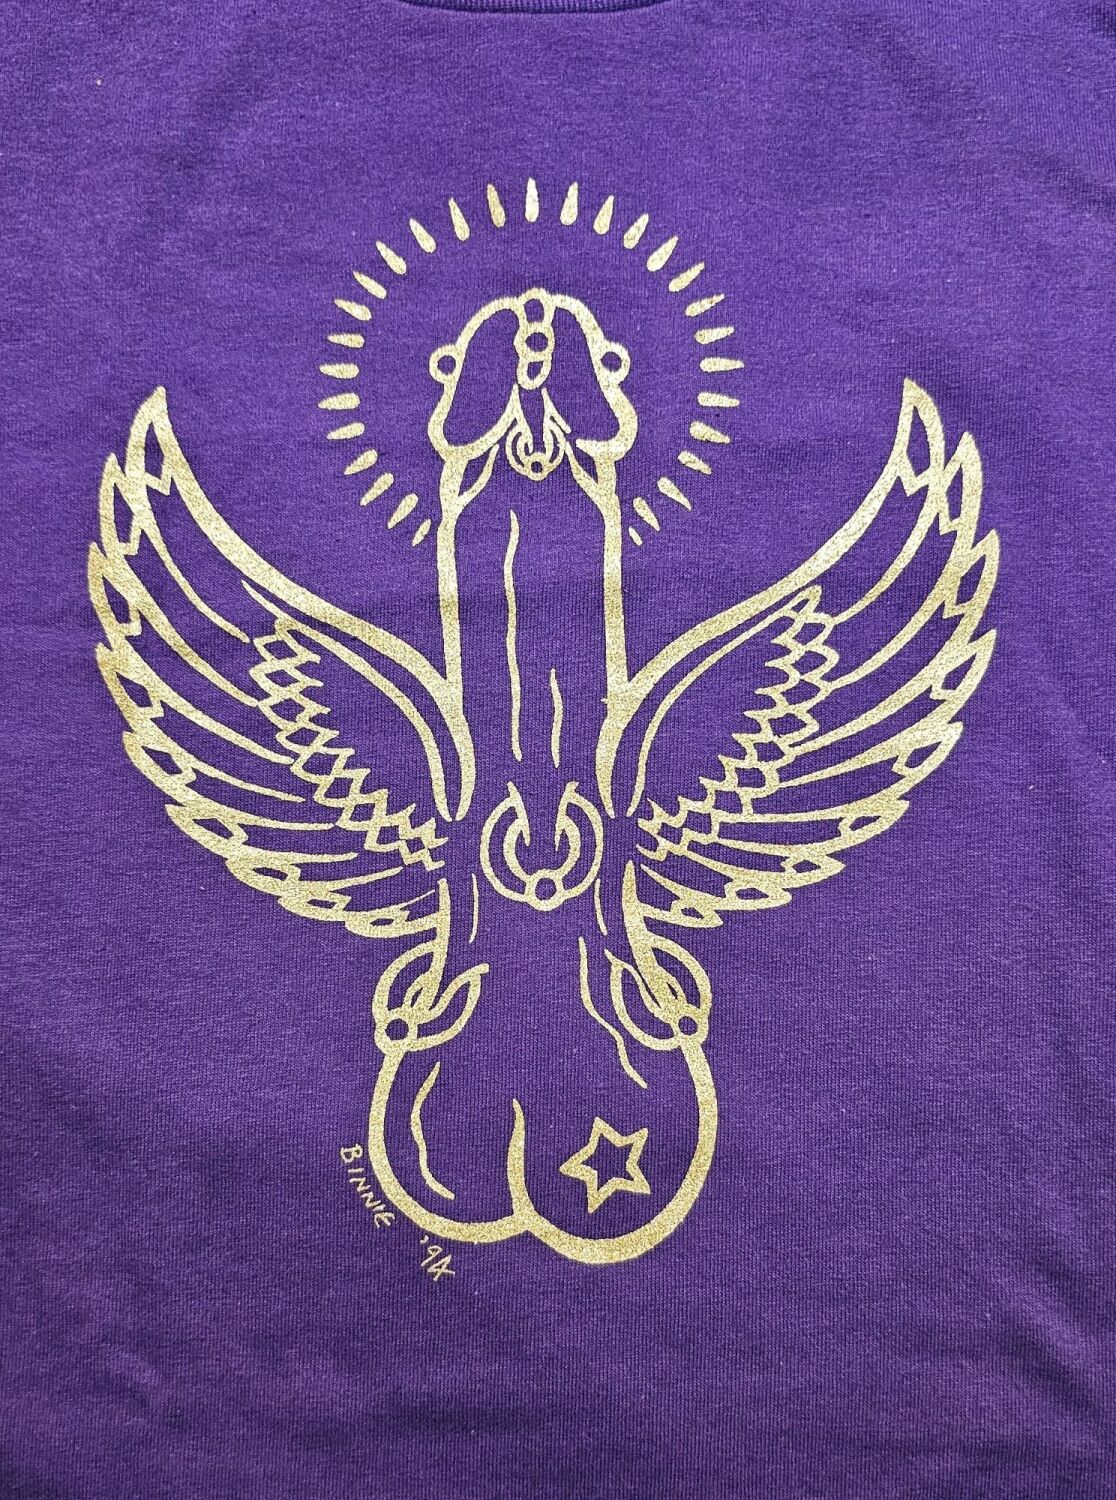 Iconic Flying cock Tee shirt  Gold on purple size XL